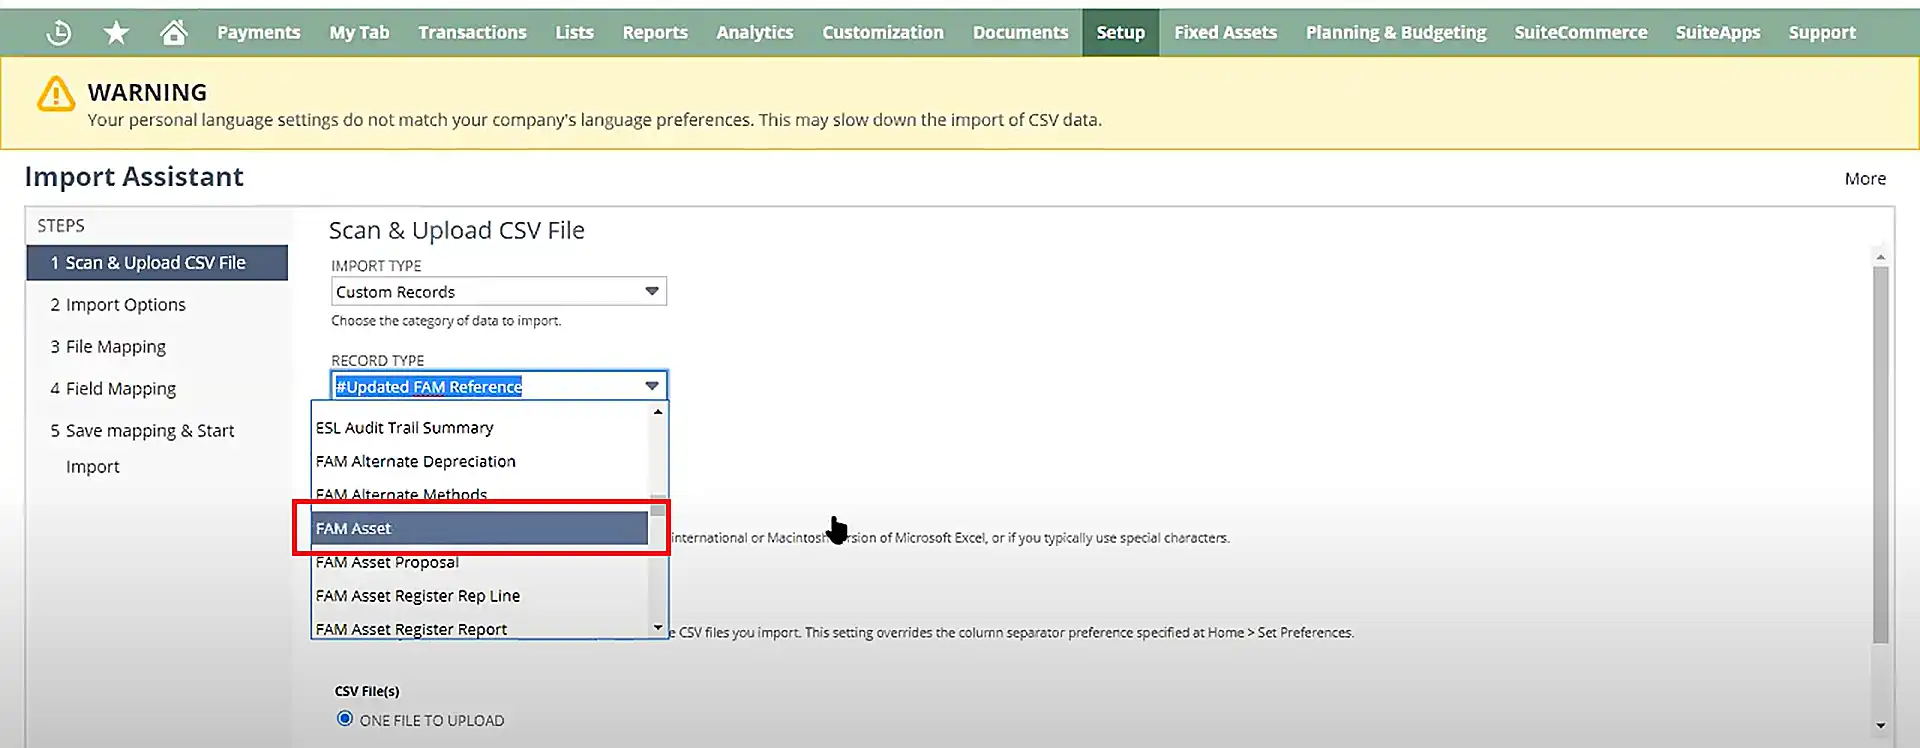 Importing Existing Asset Data into NetSuite